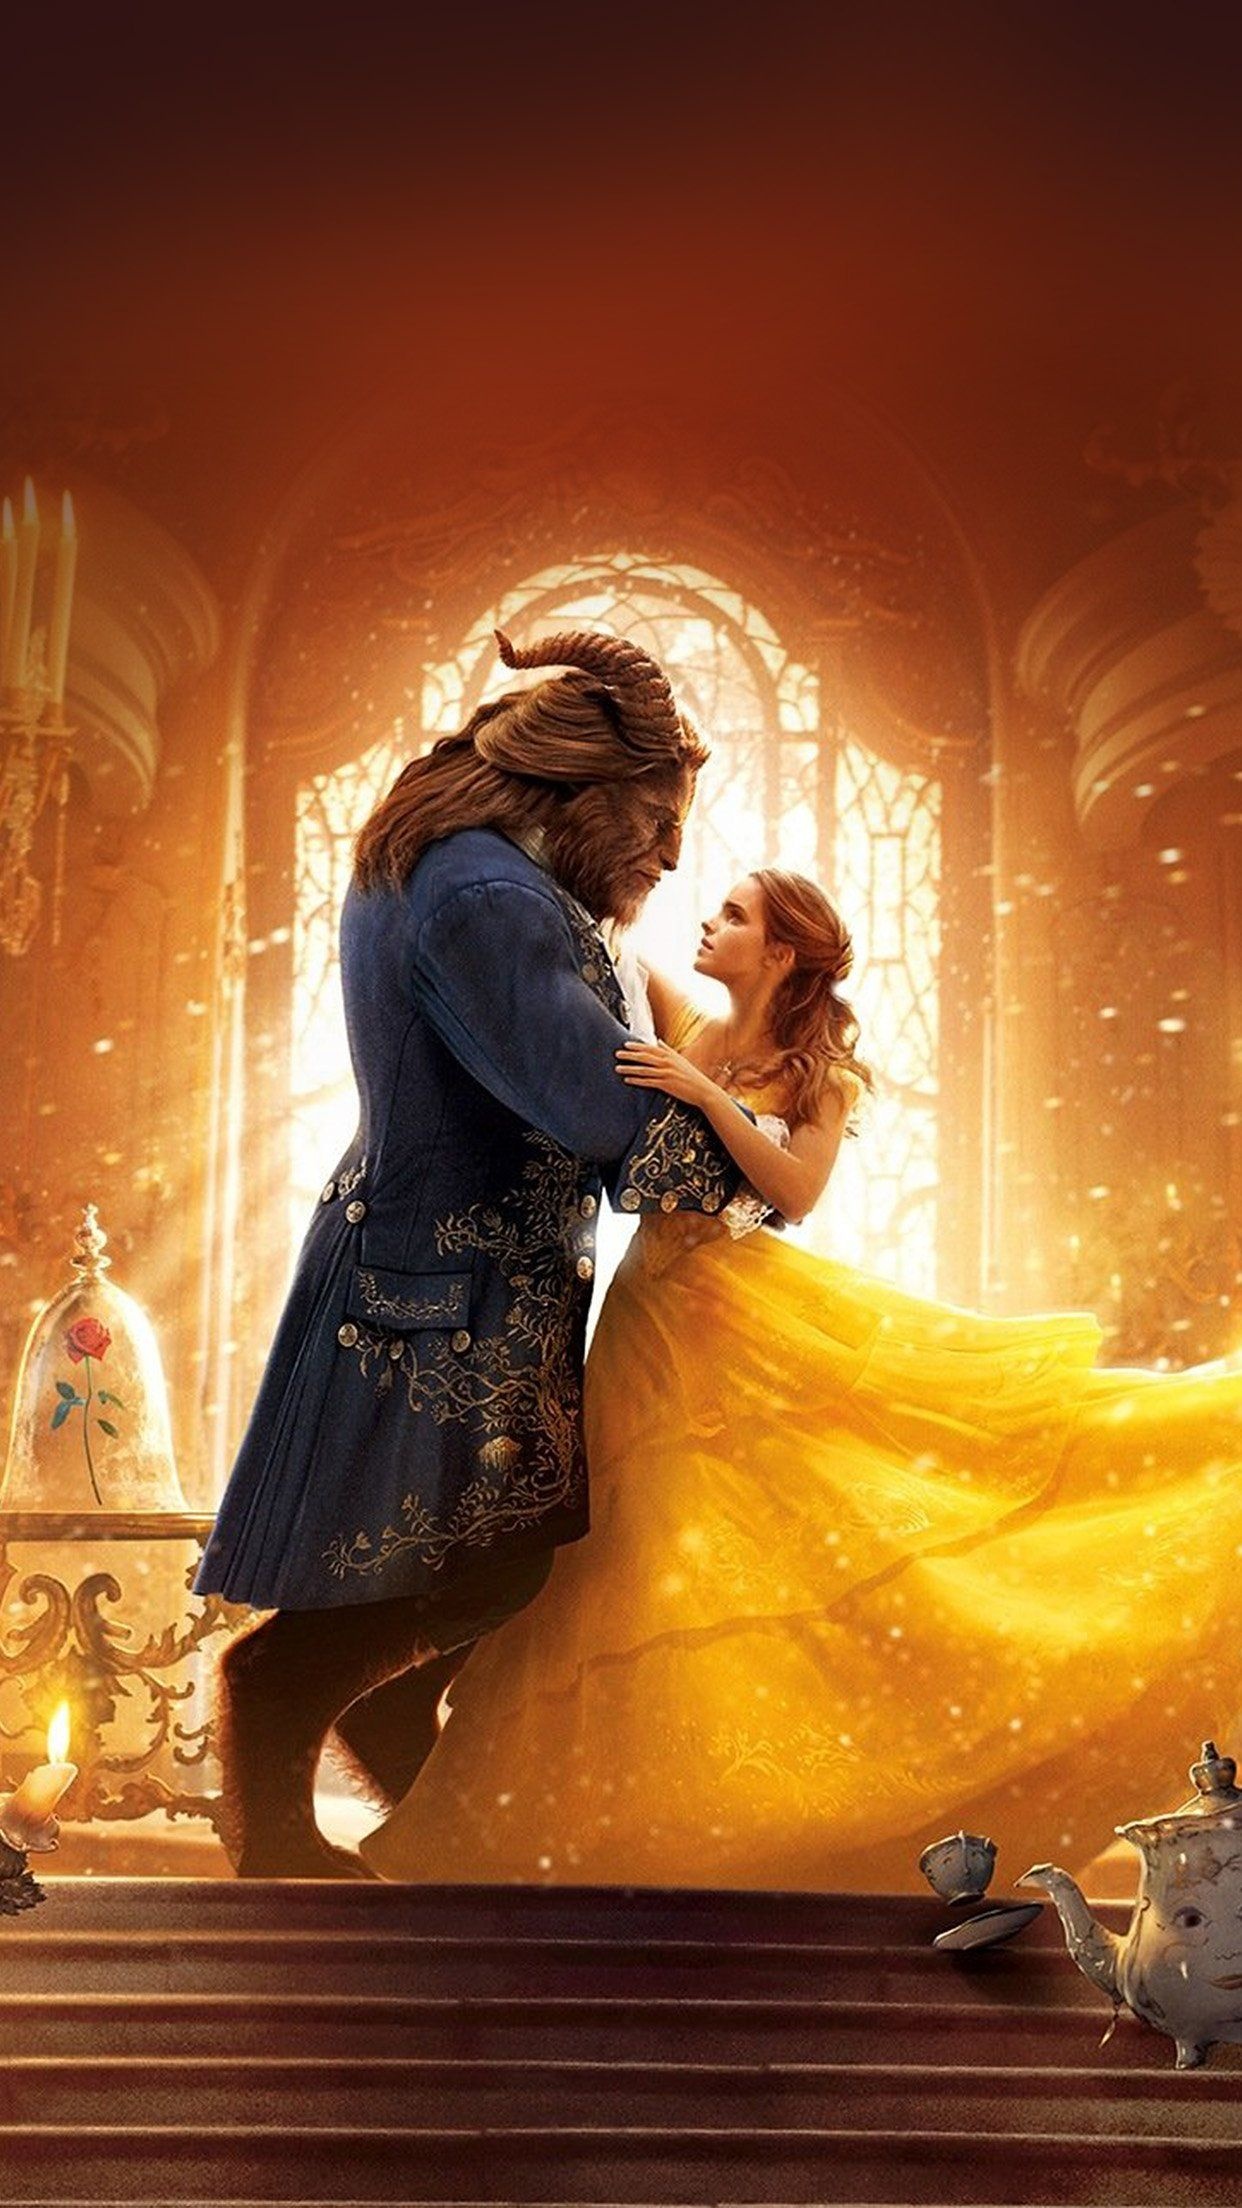 Beauty and the Beast iPhone wallpapers, Top free backgrounds, 1250x2210 HD Phone